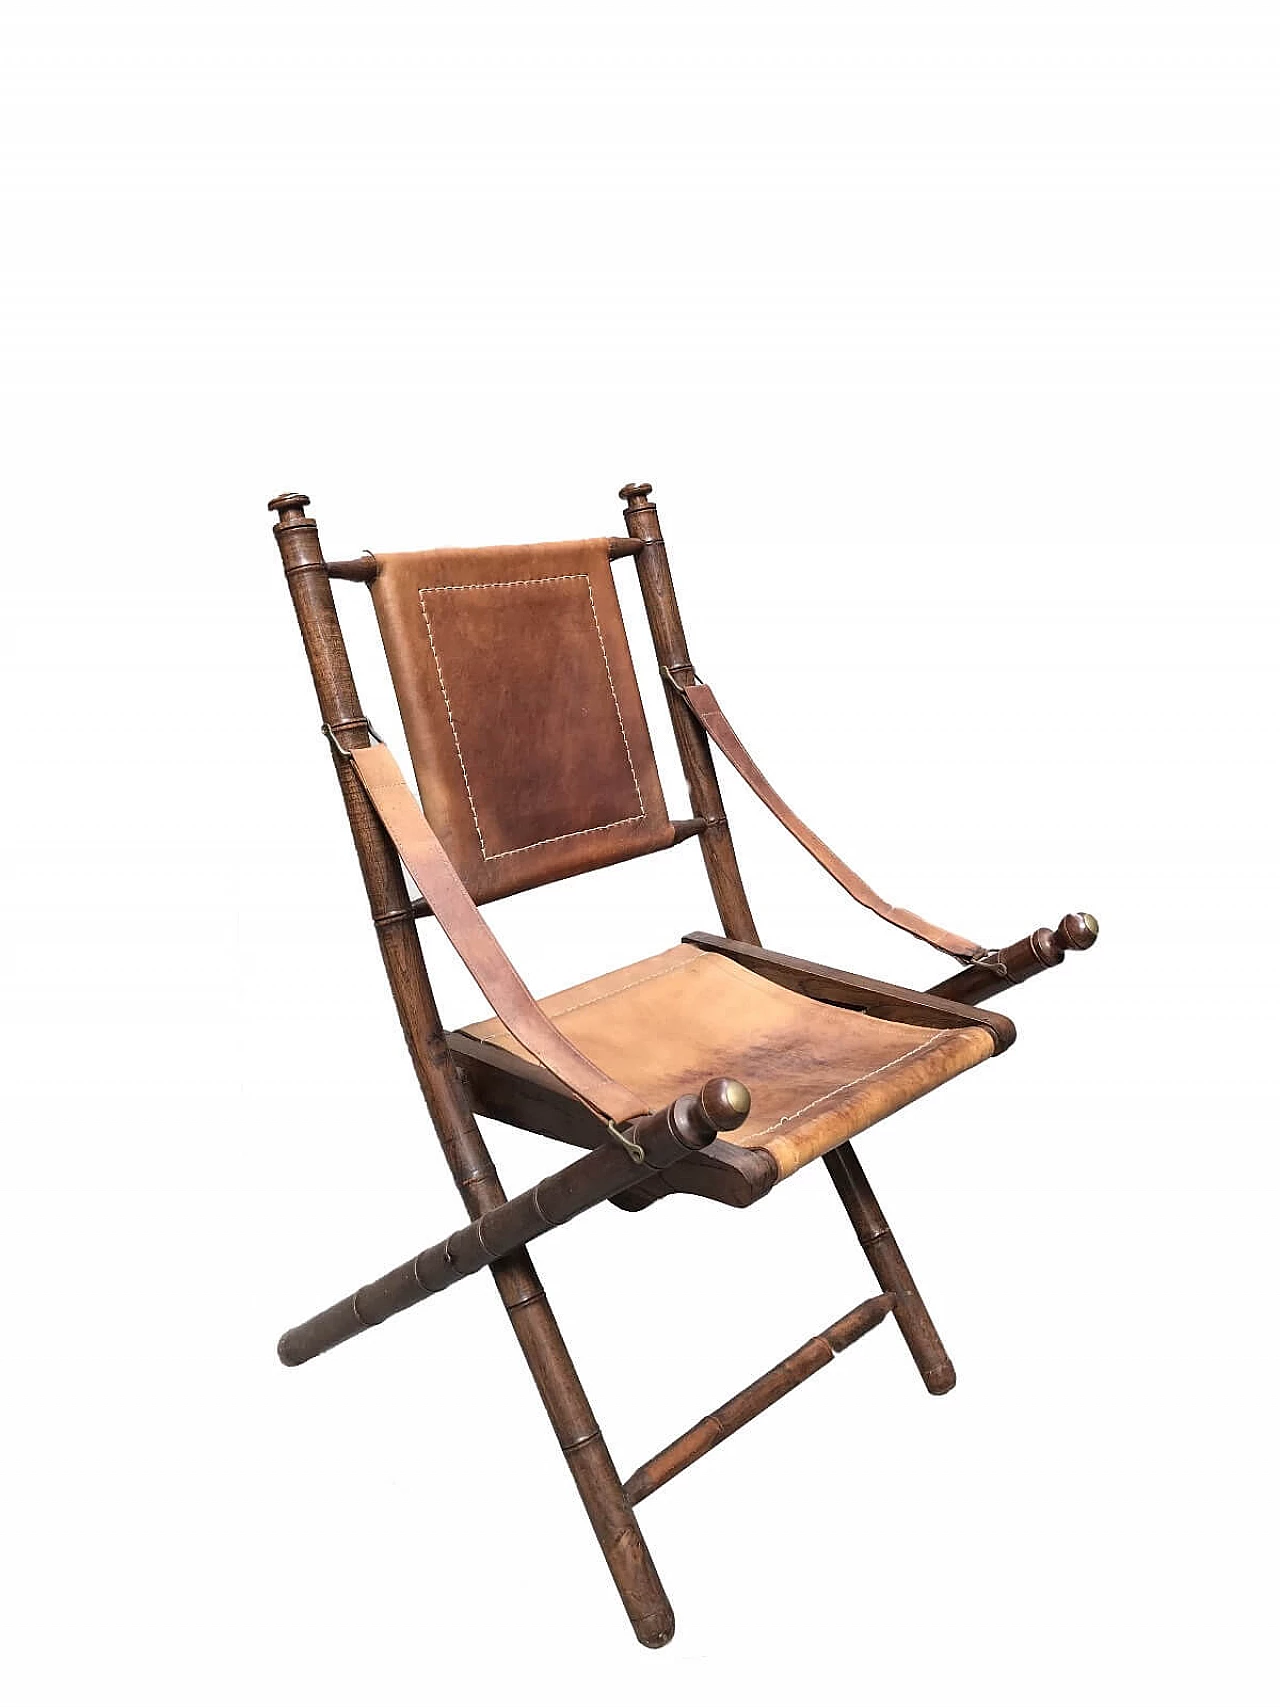 Officer's folding chair in wood and leather, 1850 approx. 8